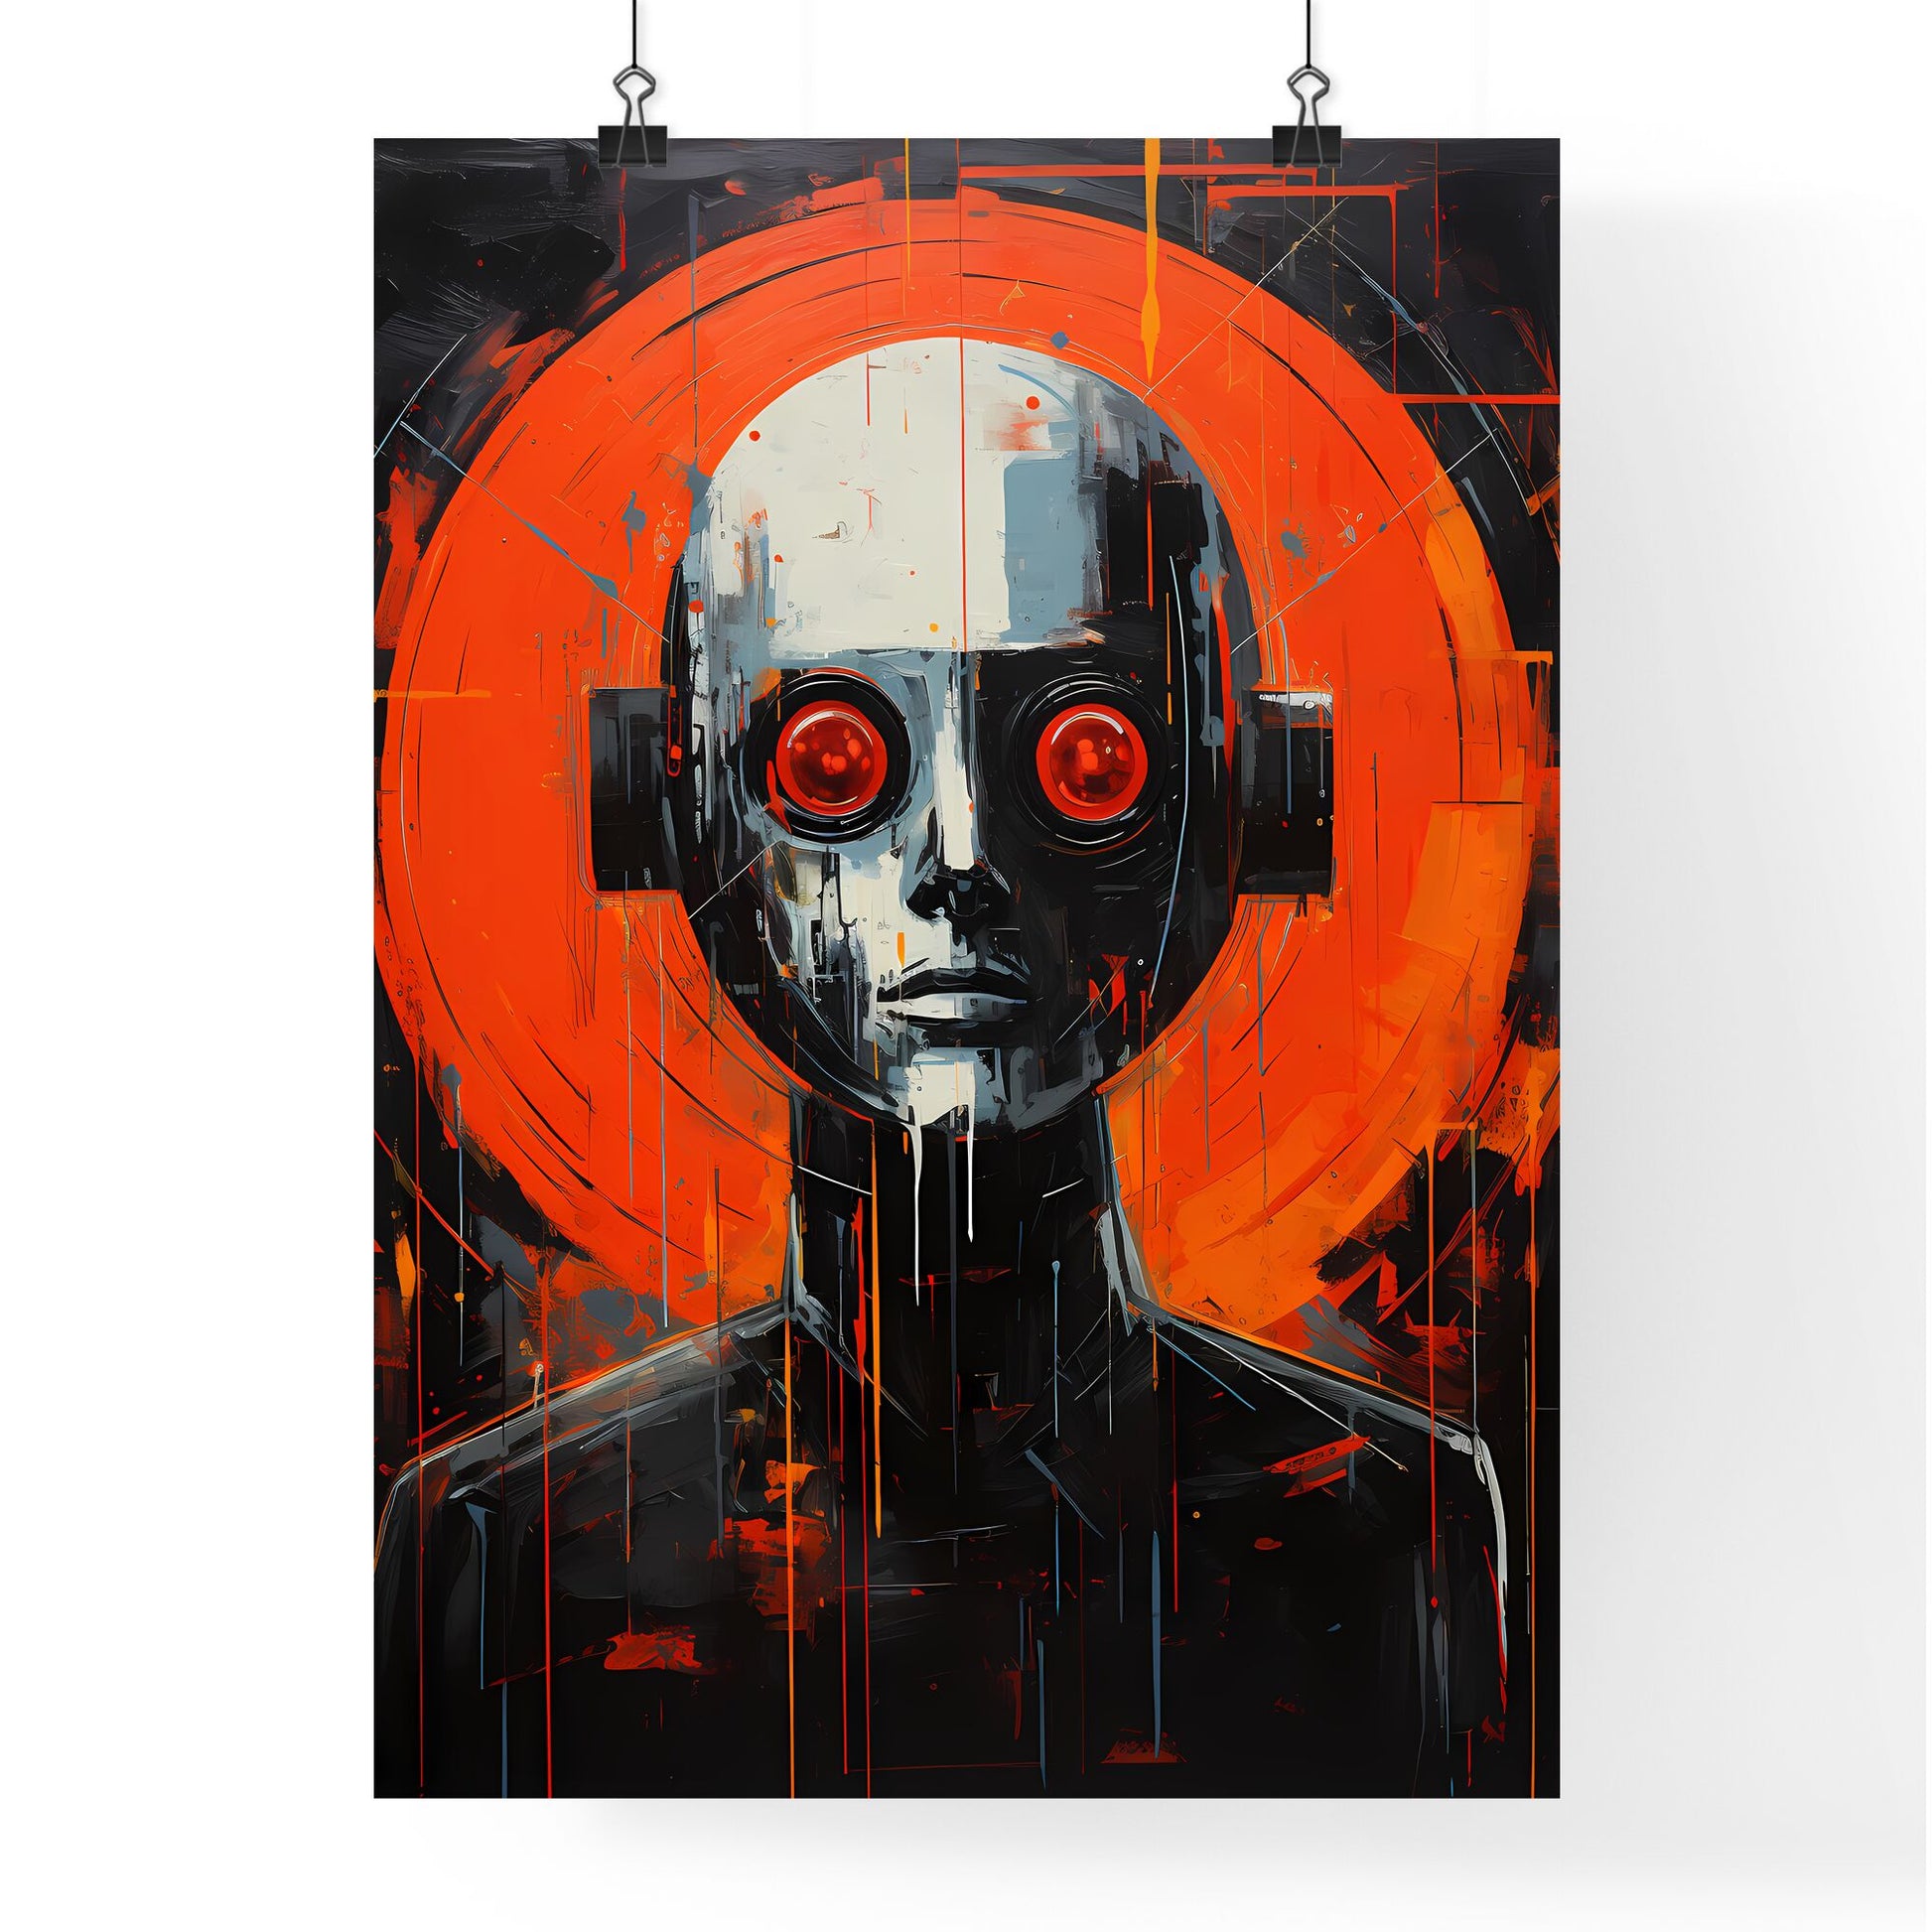 Hal 9000 - A Painting Of A Robot With Red Eyes Default Title